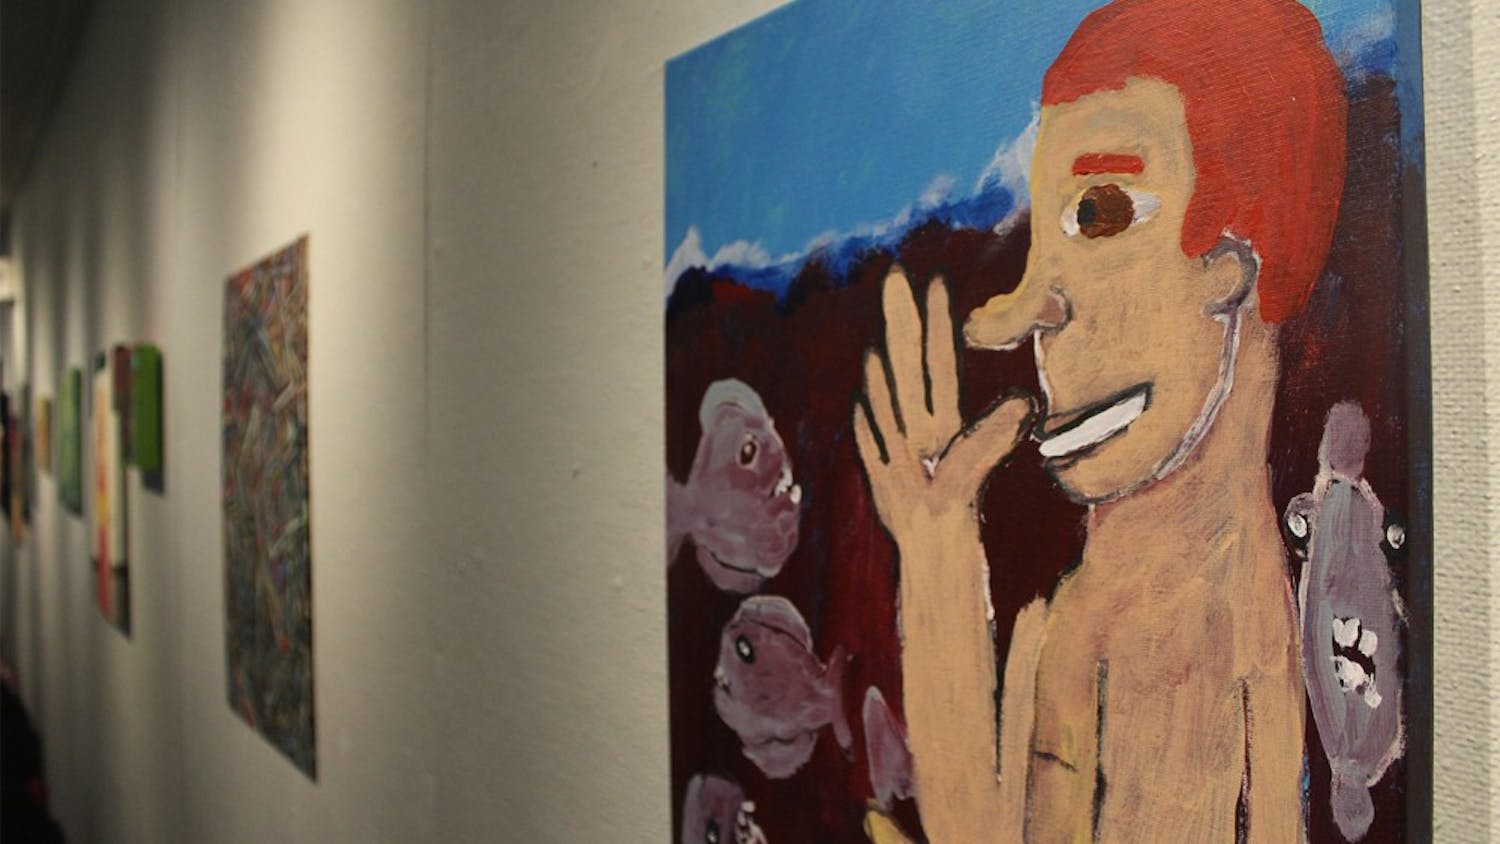 New exhibit in the Student Union of art created by the mentally ill